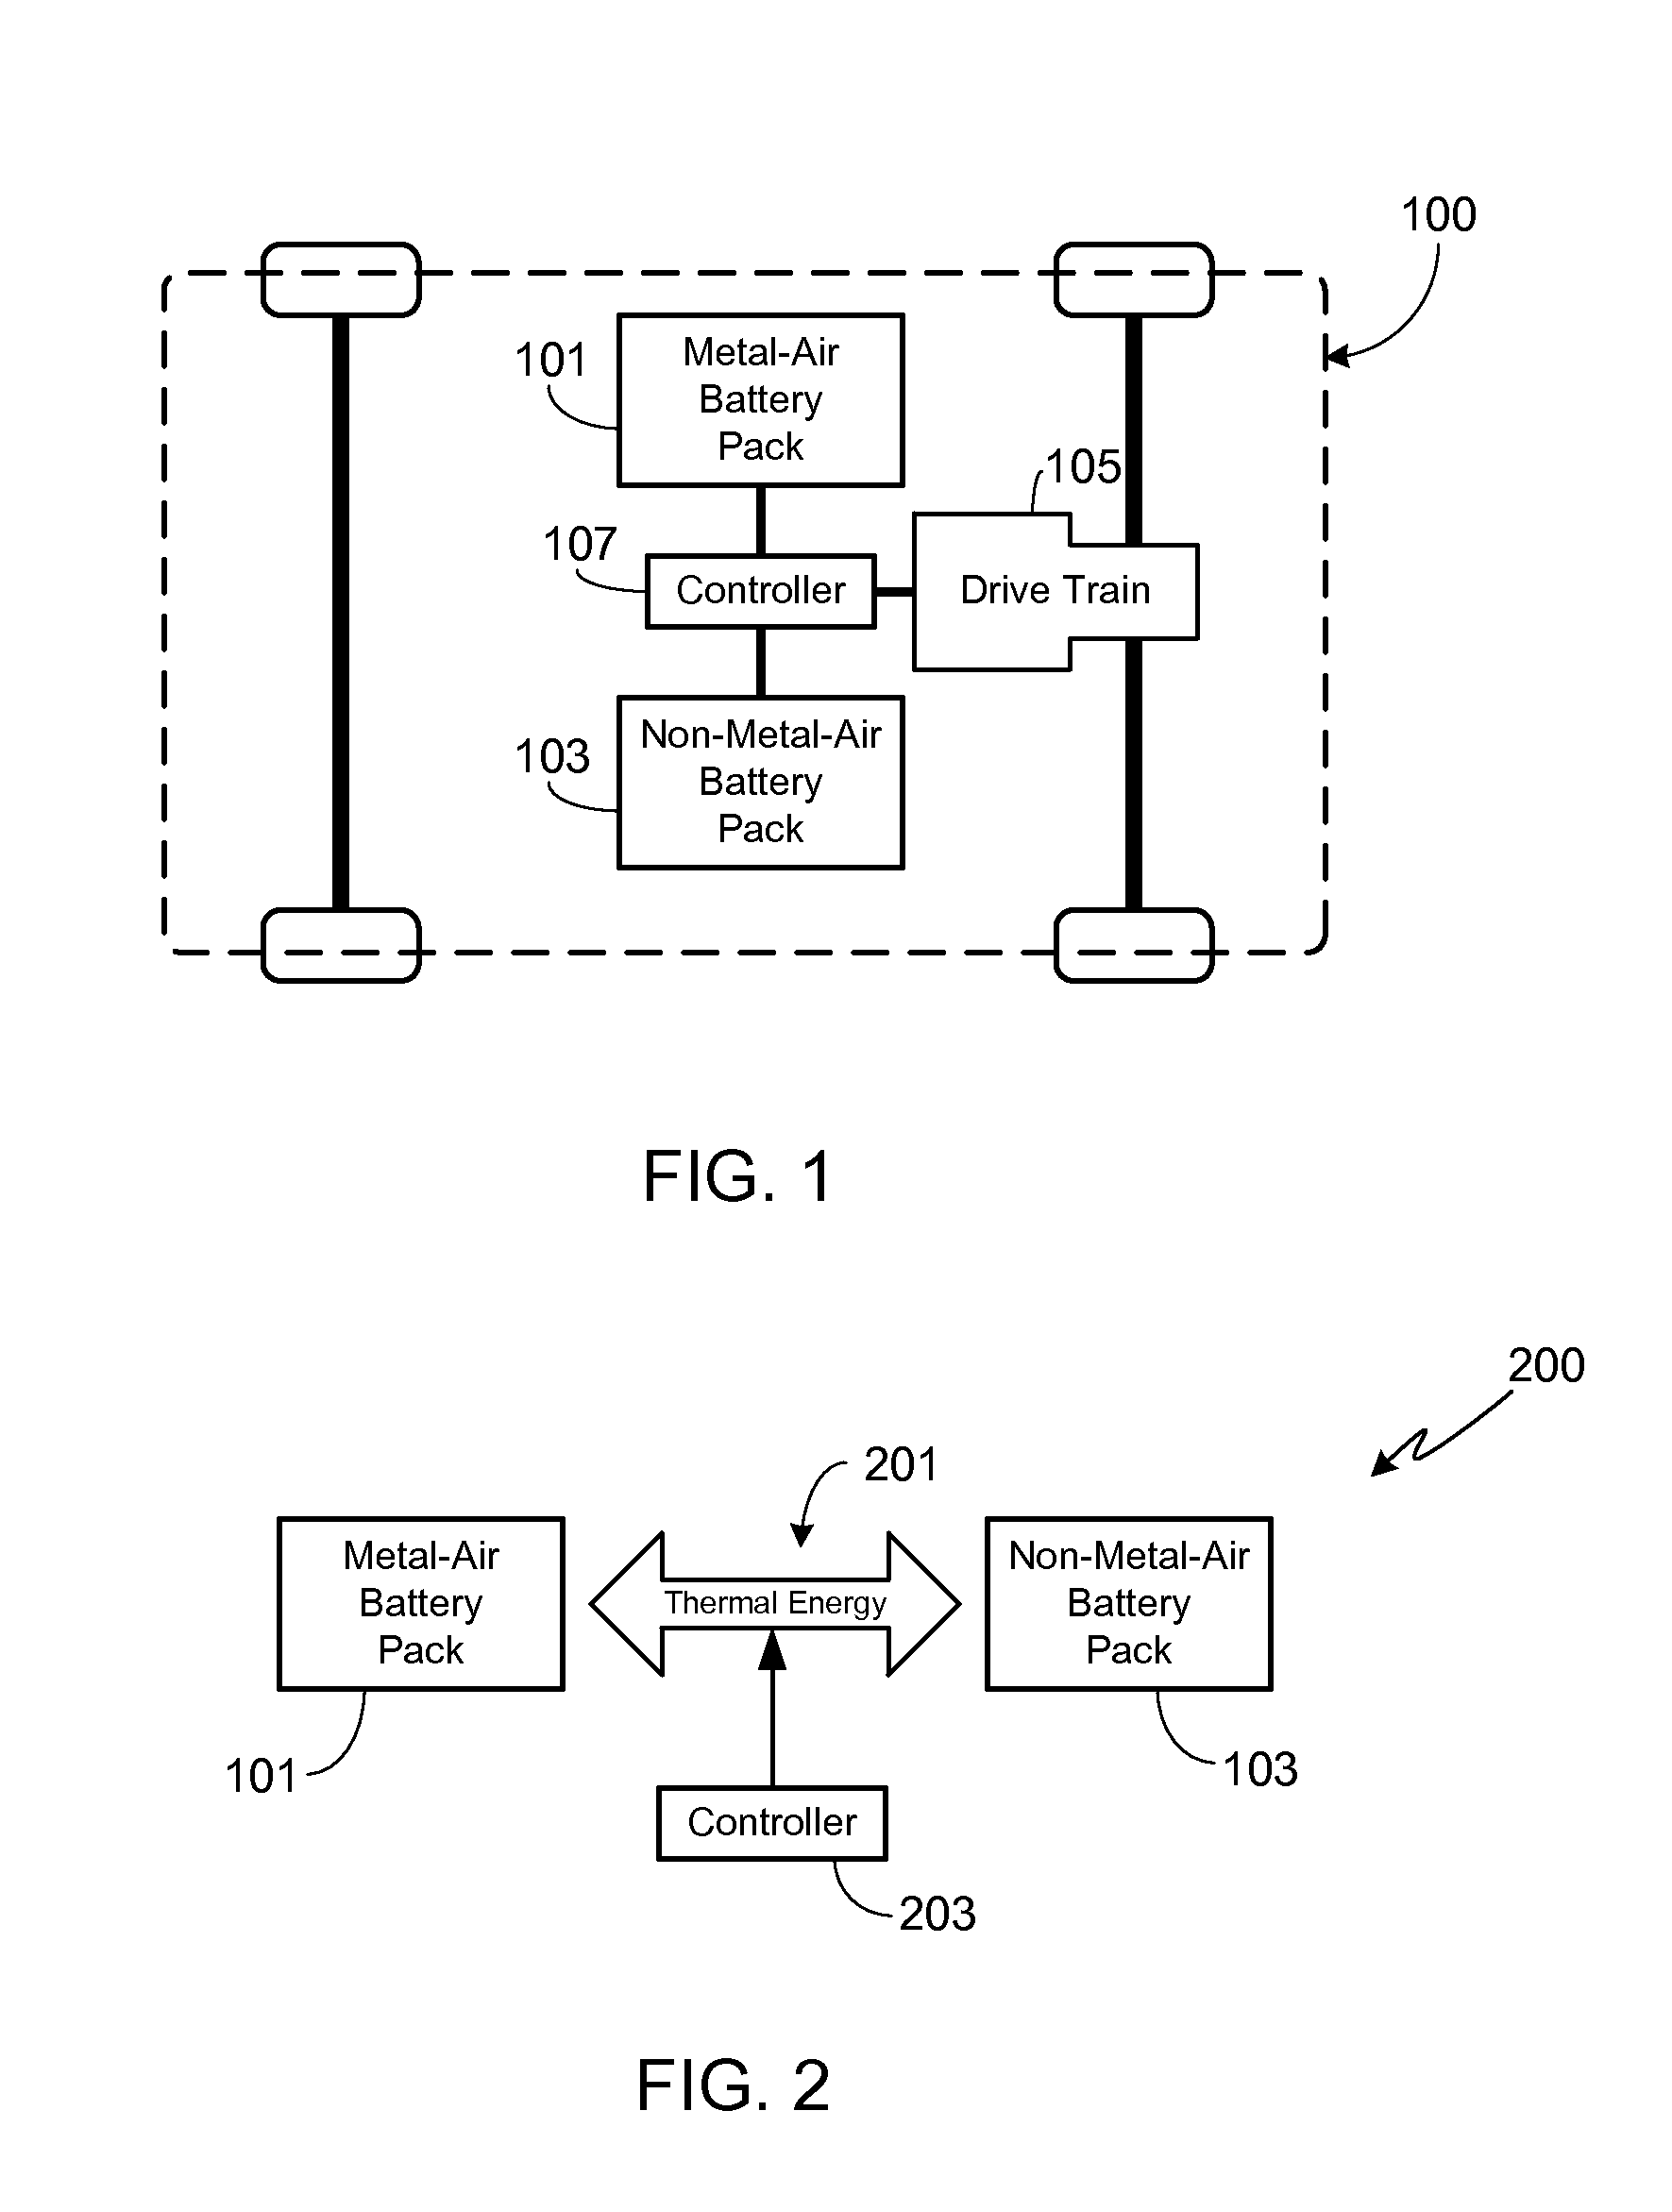 Thermal energy transfer system for a power source utilizing both metal-air and non-metal-air battery packs